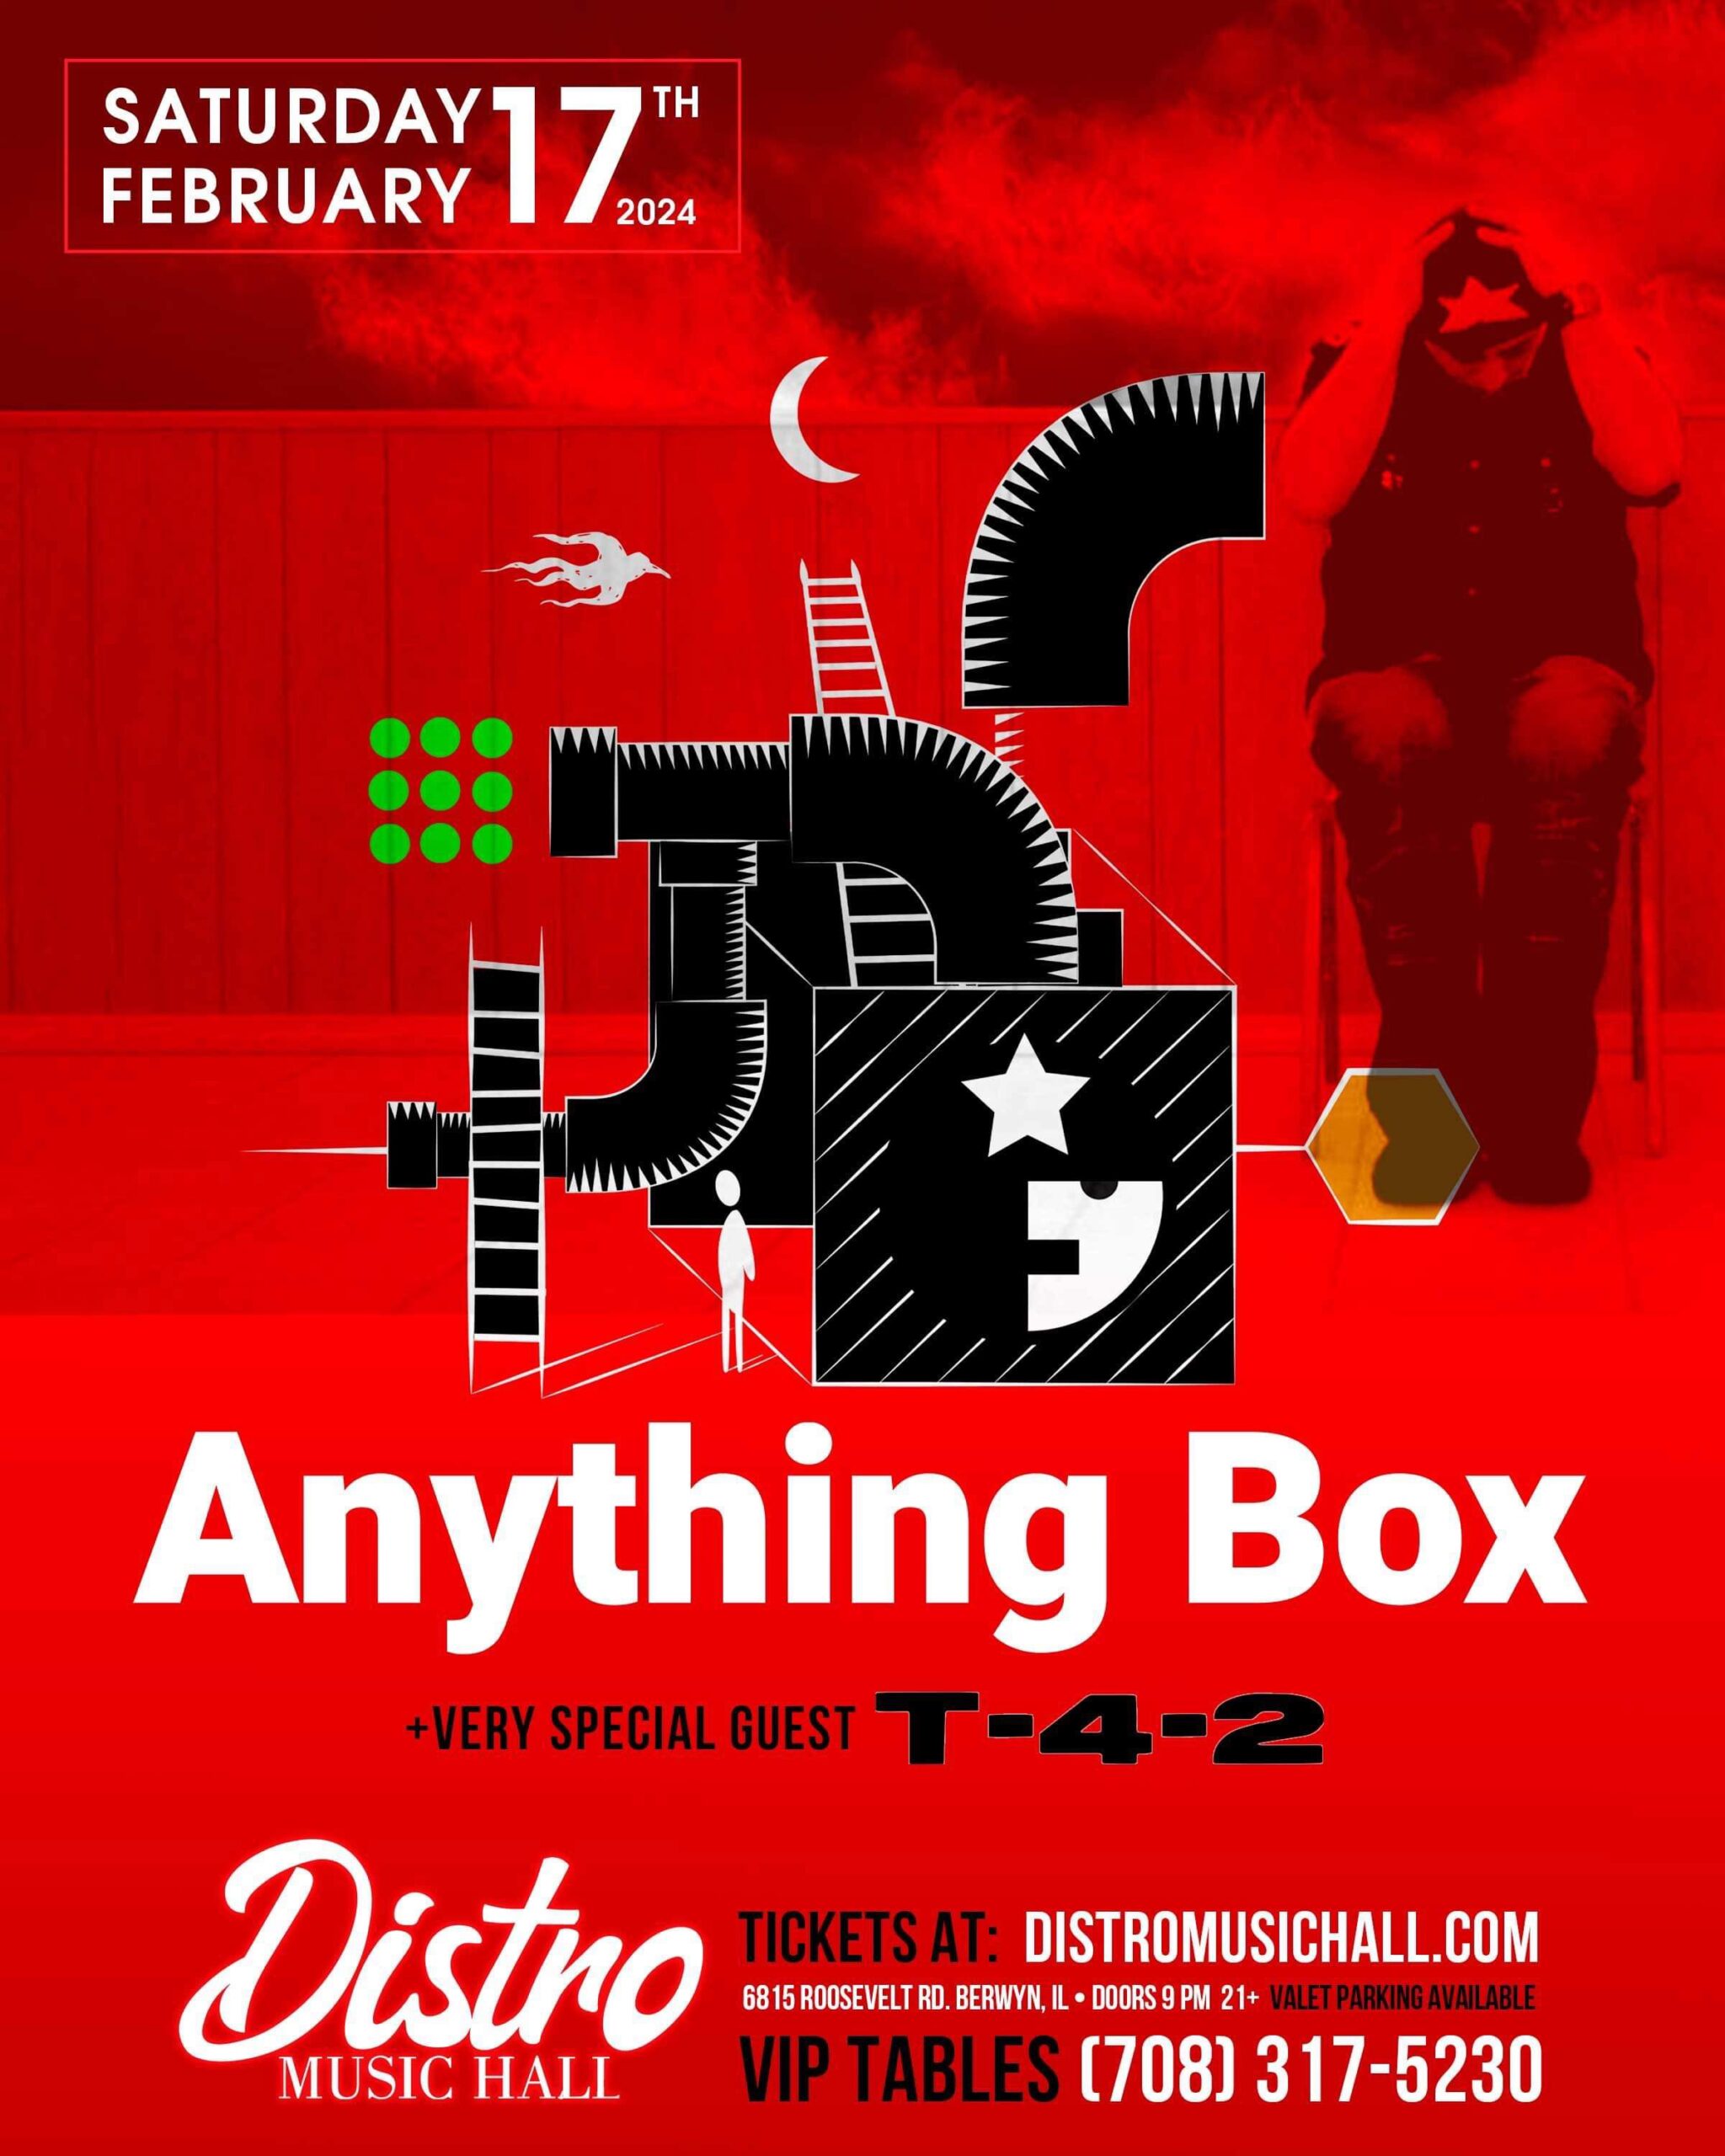 Anything Box + T-4-2 | Chicago